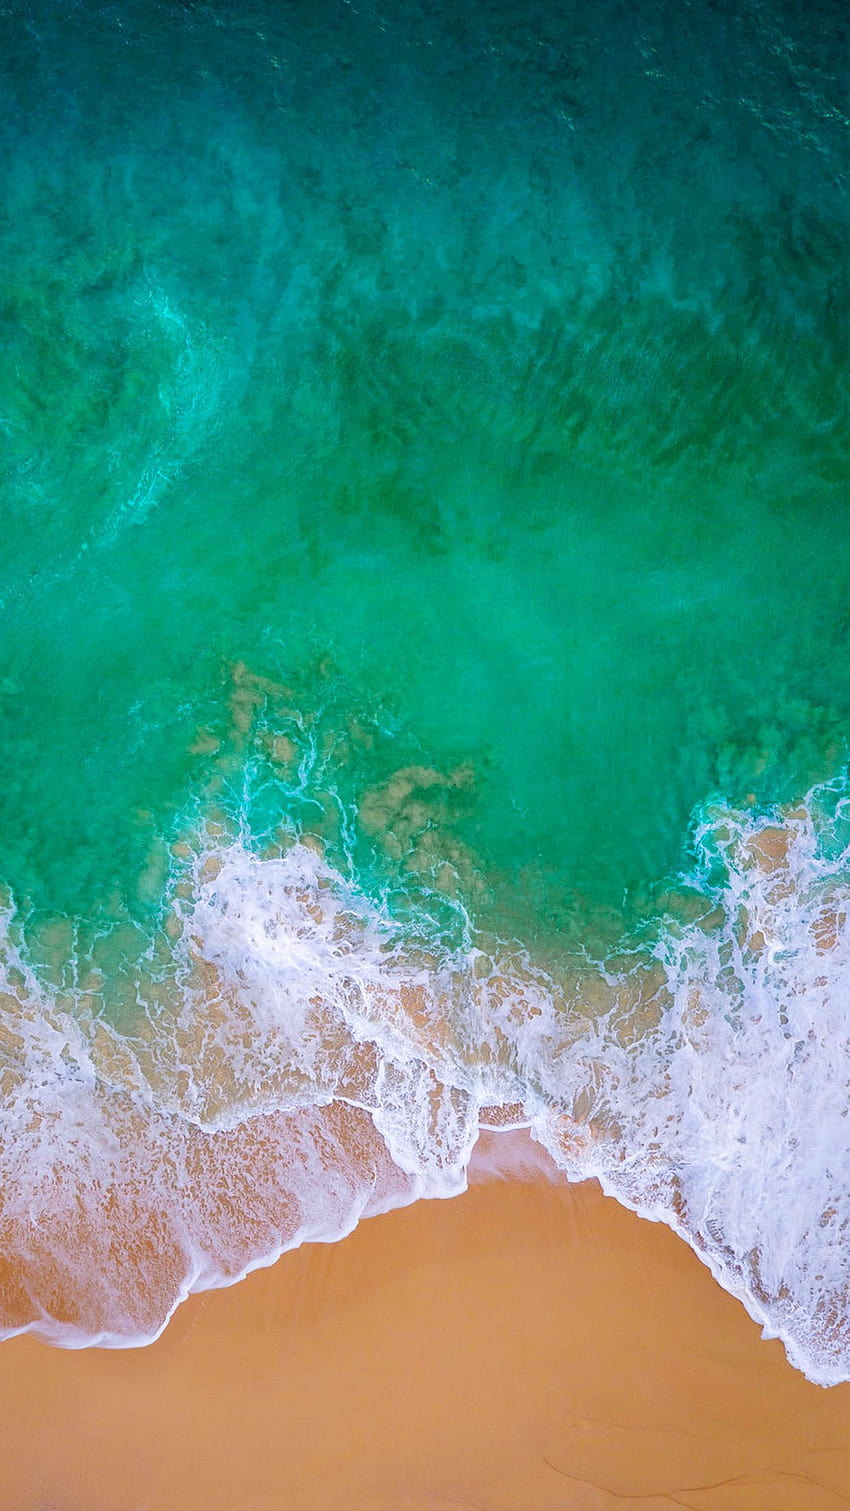 Download the new iOS 11 wallpapers